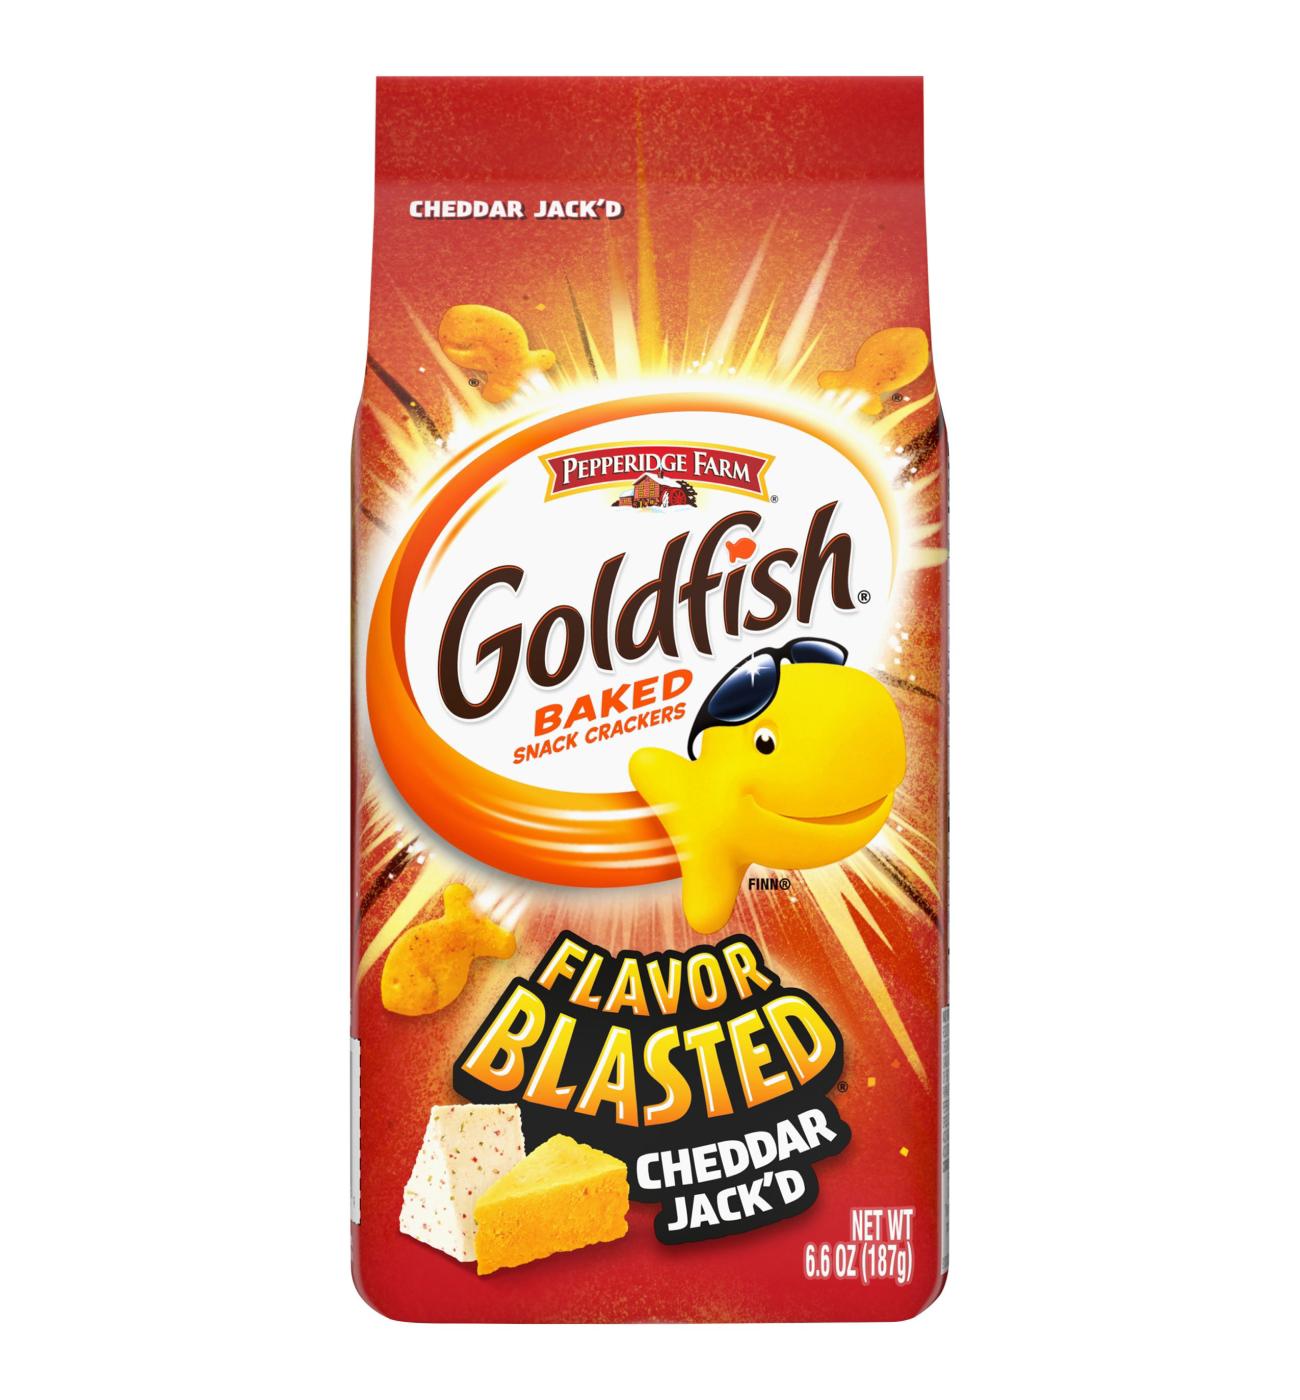 Goldfish Flavor Blasted Cheddar Jackd Crackers Snack Crackers; image 1 of 3